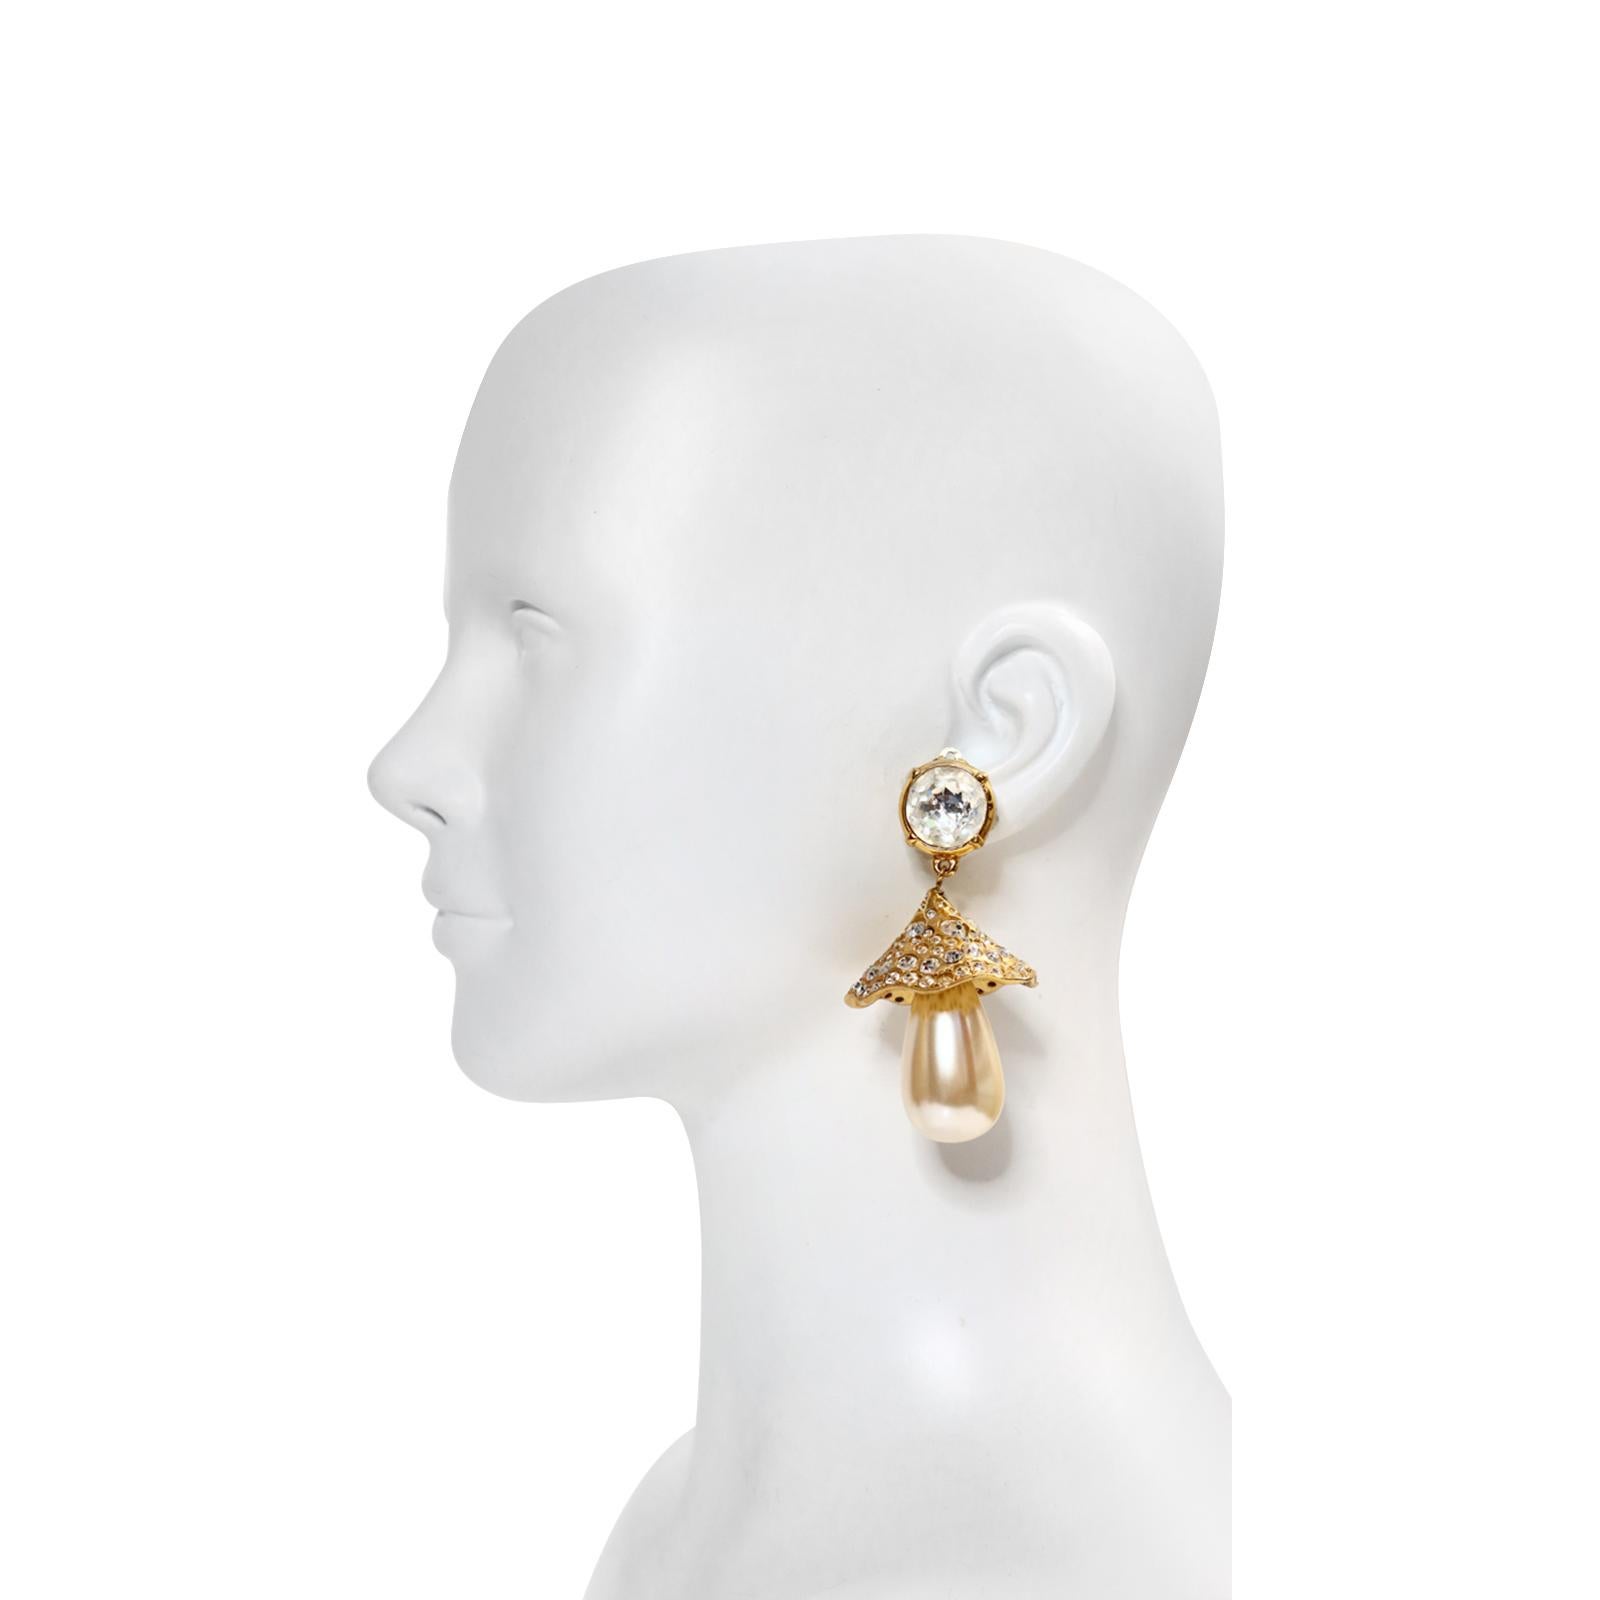 Vintage Yves Saint Laurent YSL Diamante Dome like Pearl Earrings, circa 1980s In Good Condition For Sale In New York, NY